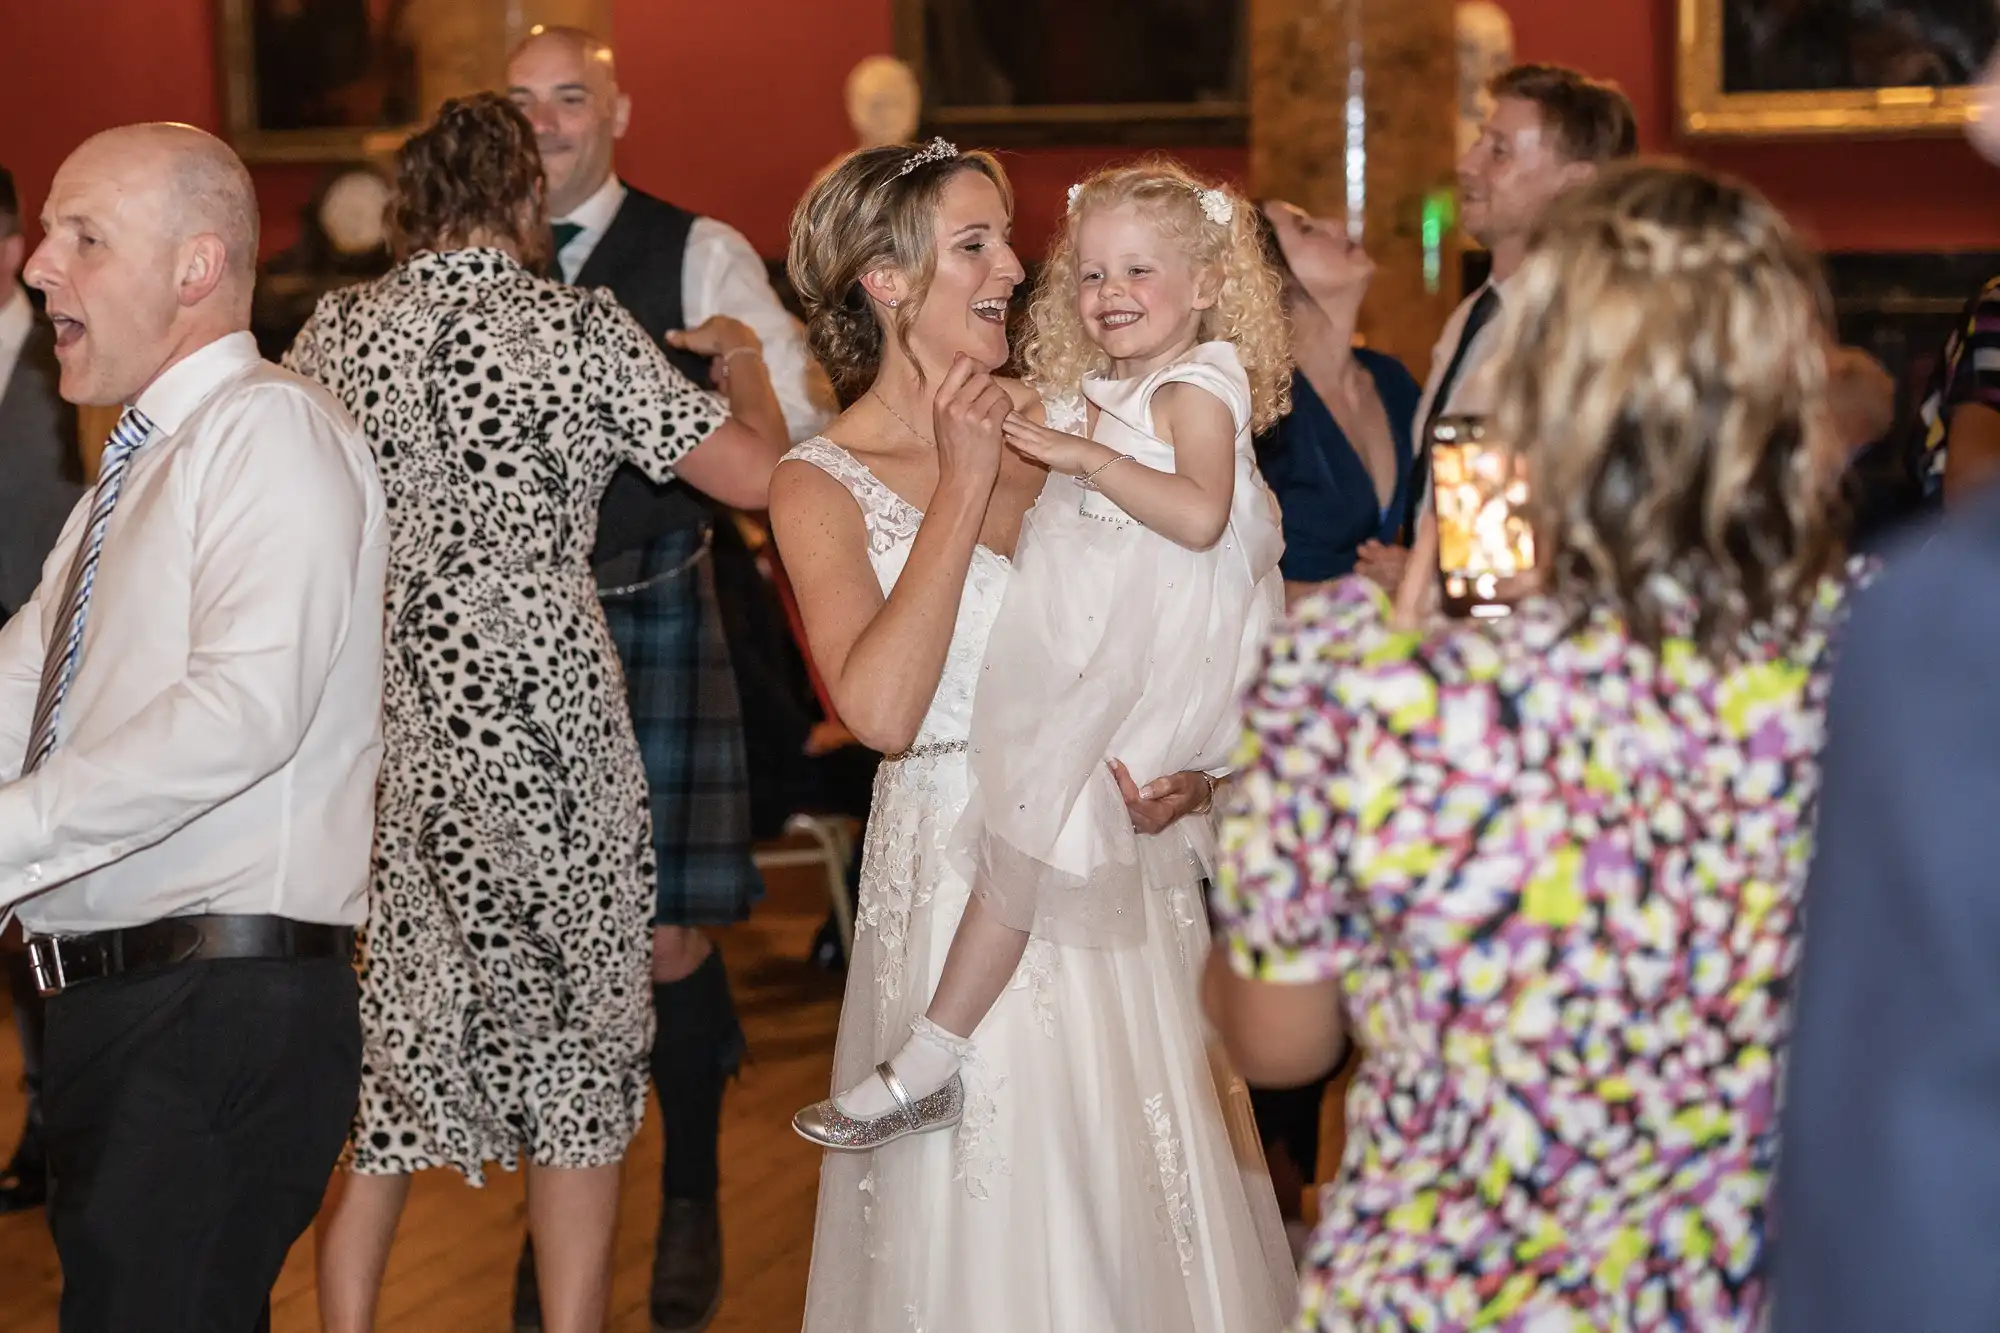 A bride holds a young girl in her arms while dancing at a wedding reception. Several other guests are also dancing around them.